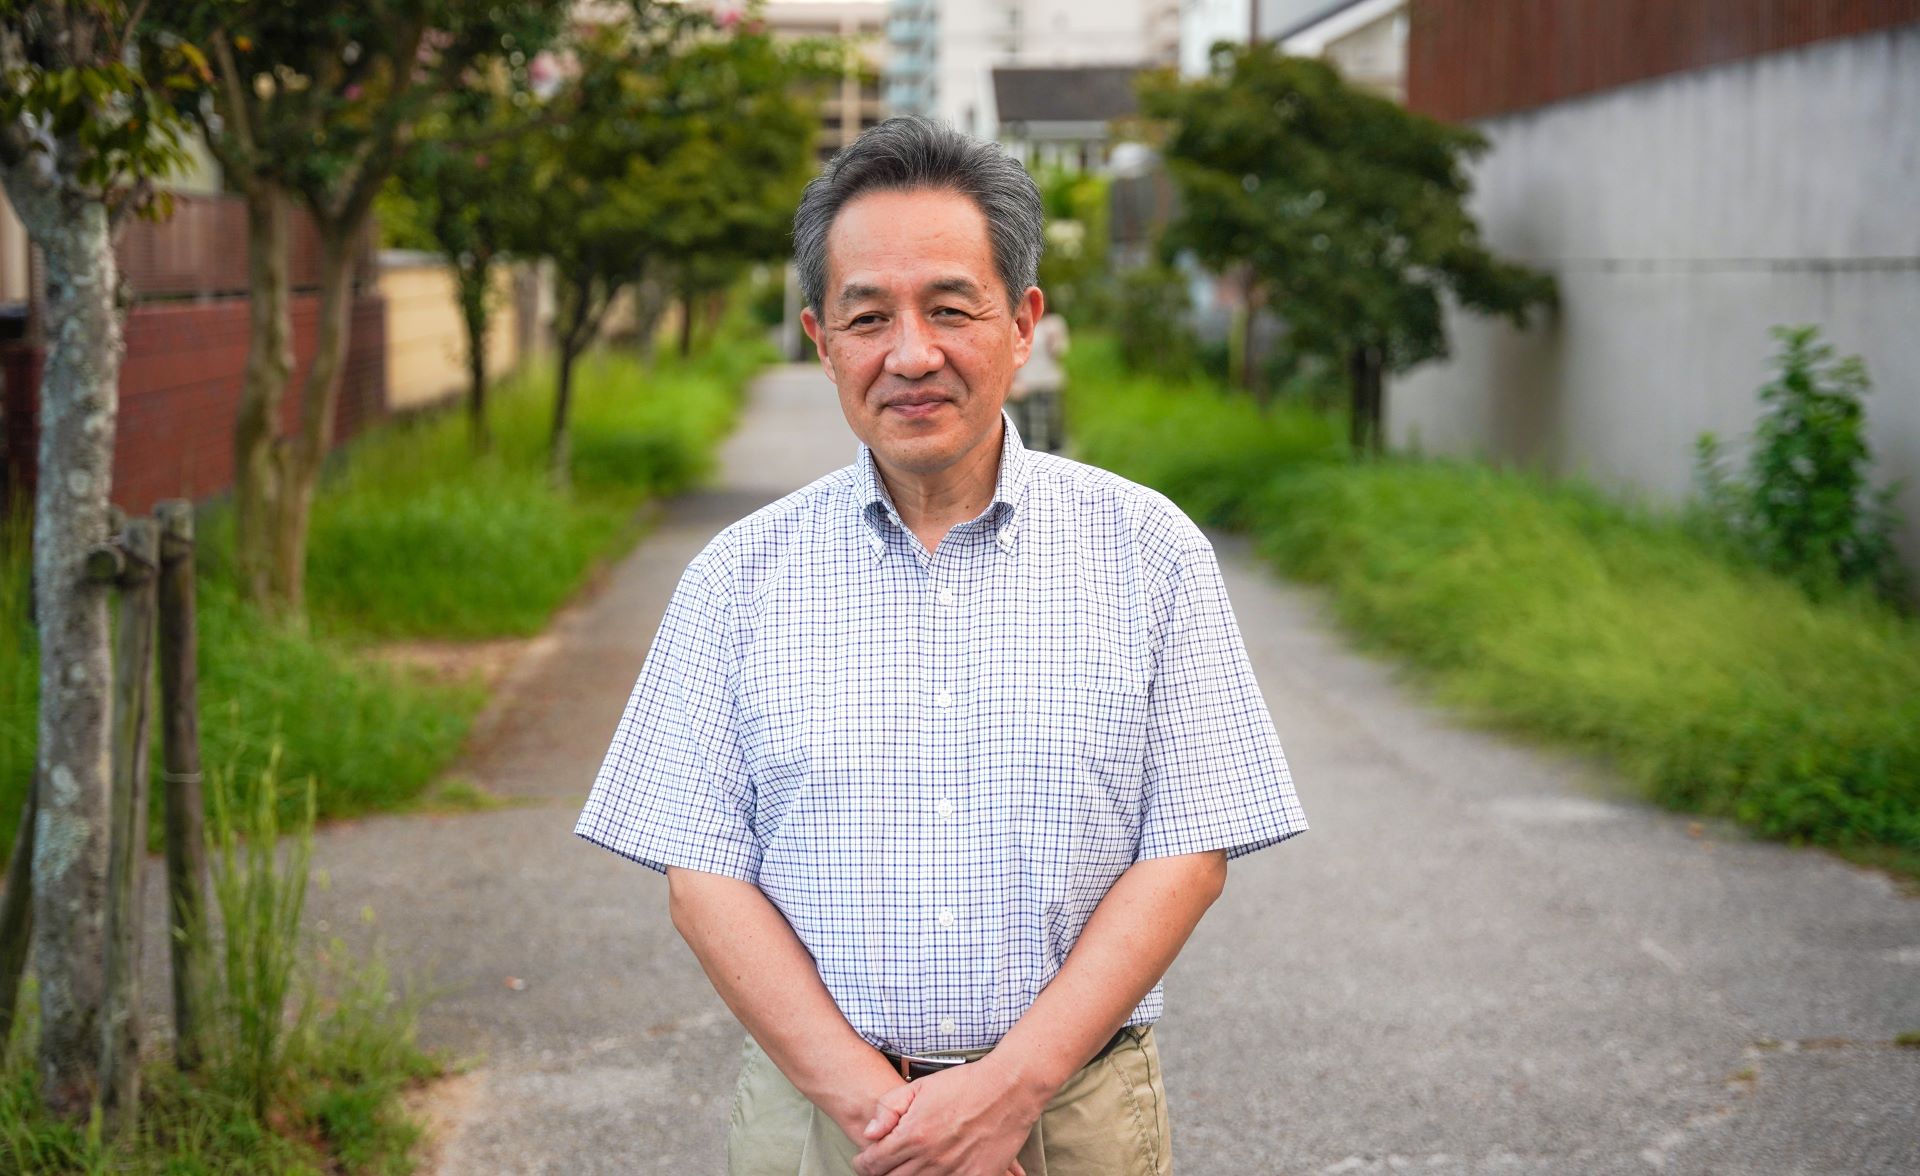 Mr Katsumura Hisashi stand outside near where he lives in Japan